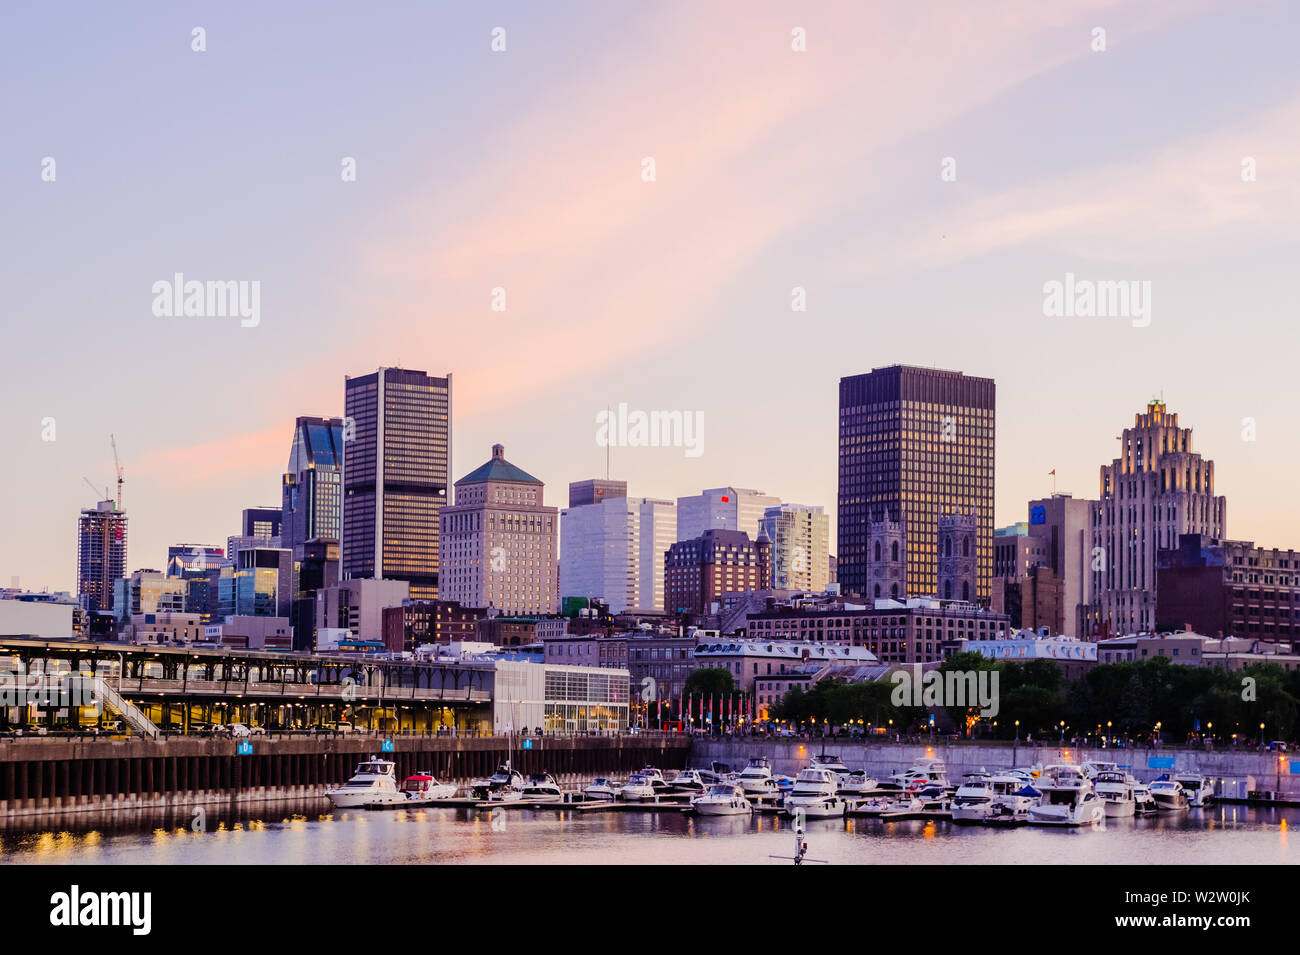 MONTREAL, CANADA - JUNE 15, 2018: The quays and historical old city near the waterfront are a popular tourist area on a summer evening. Stock Photo